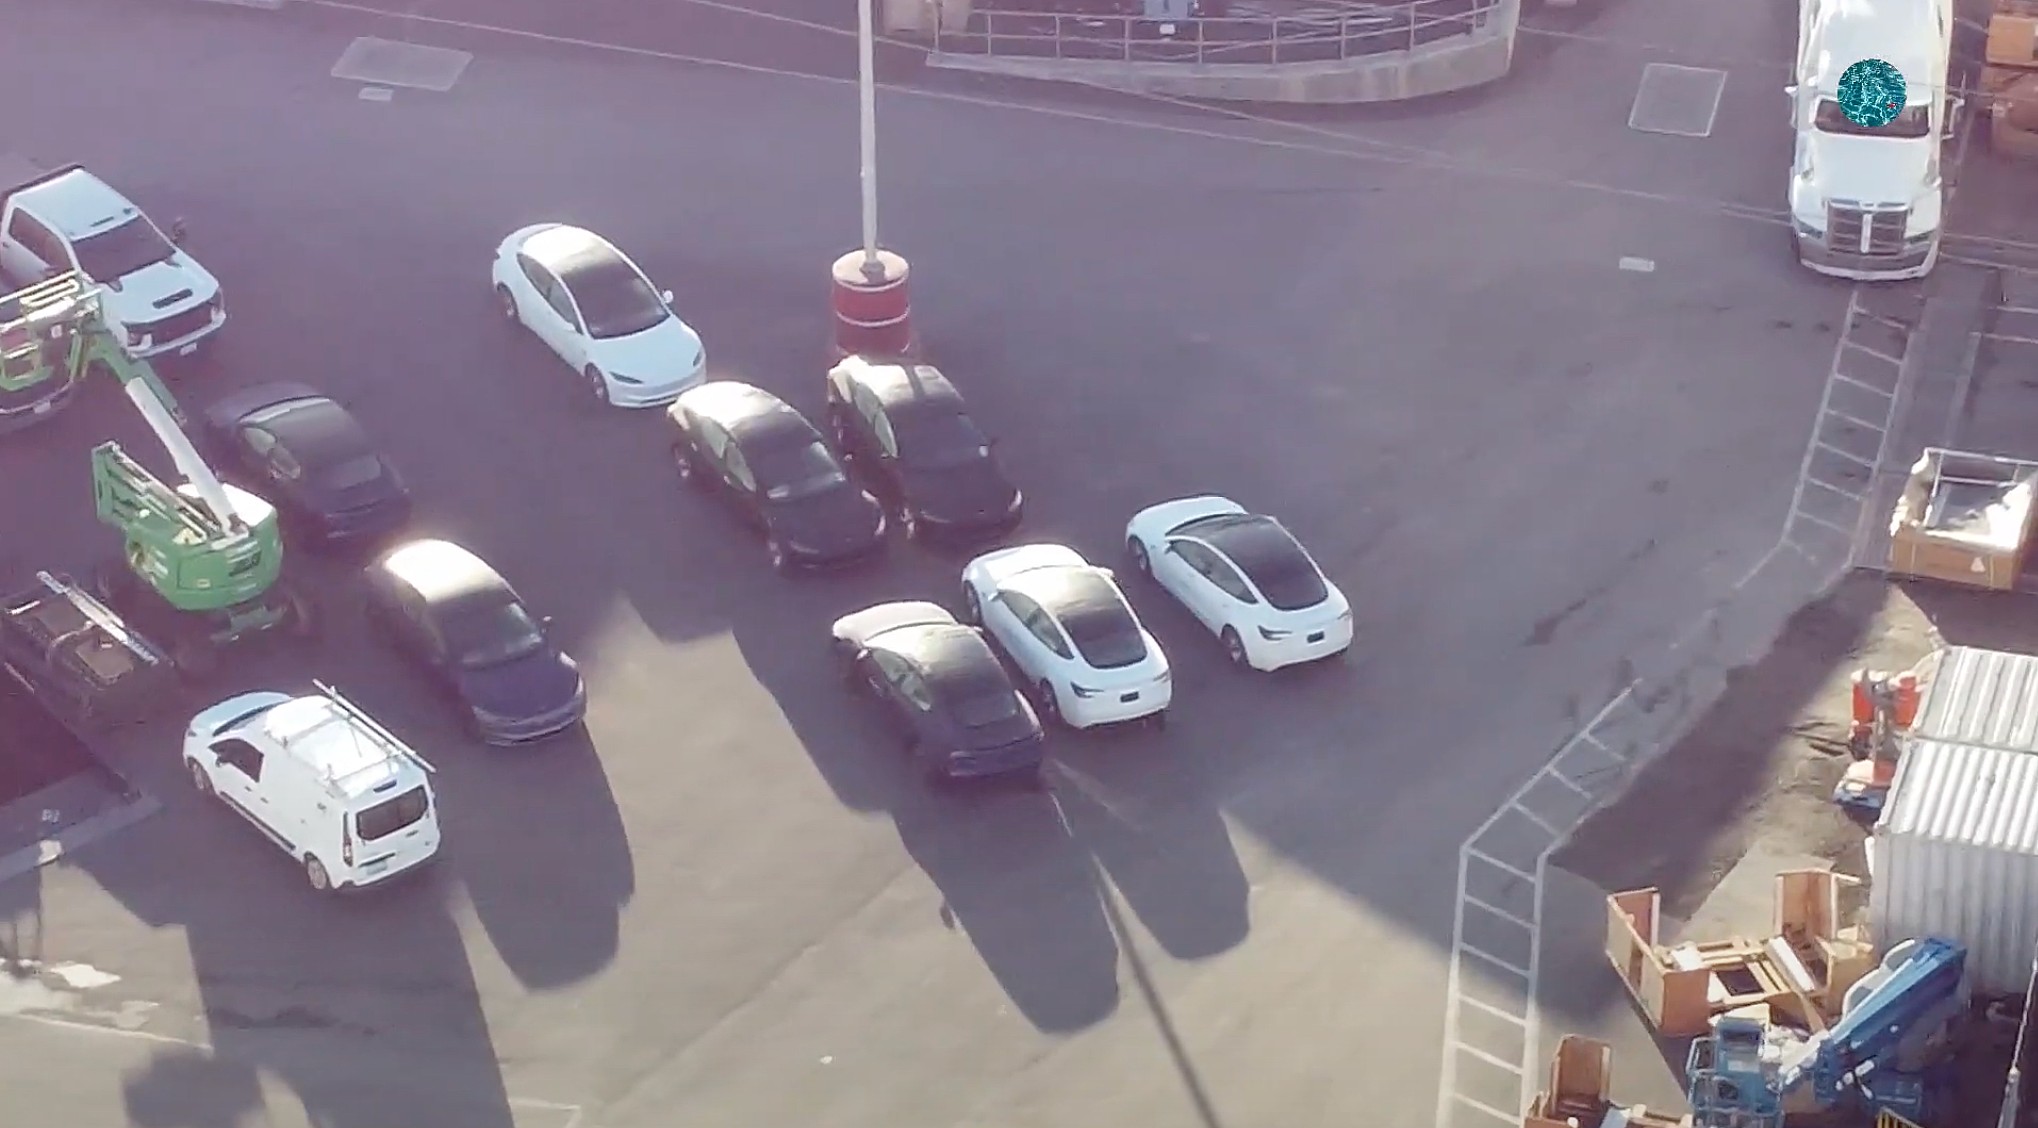 Tesla Has a Fleet of Updated Model 3s at Fremont Factory